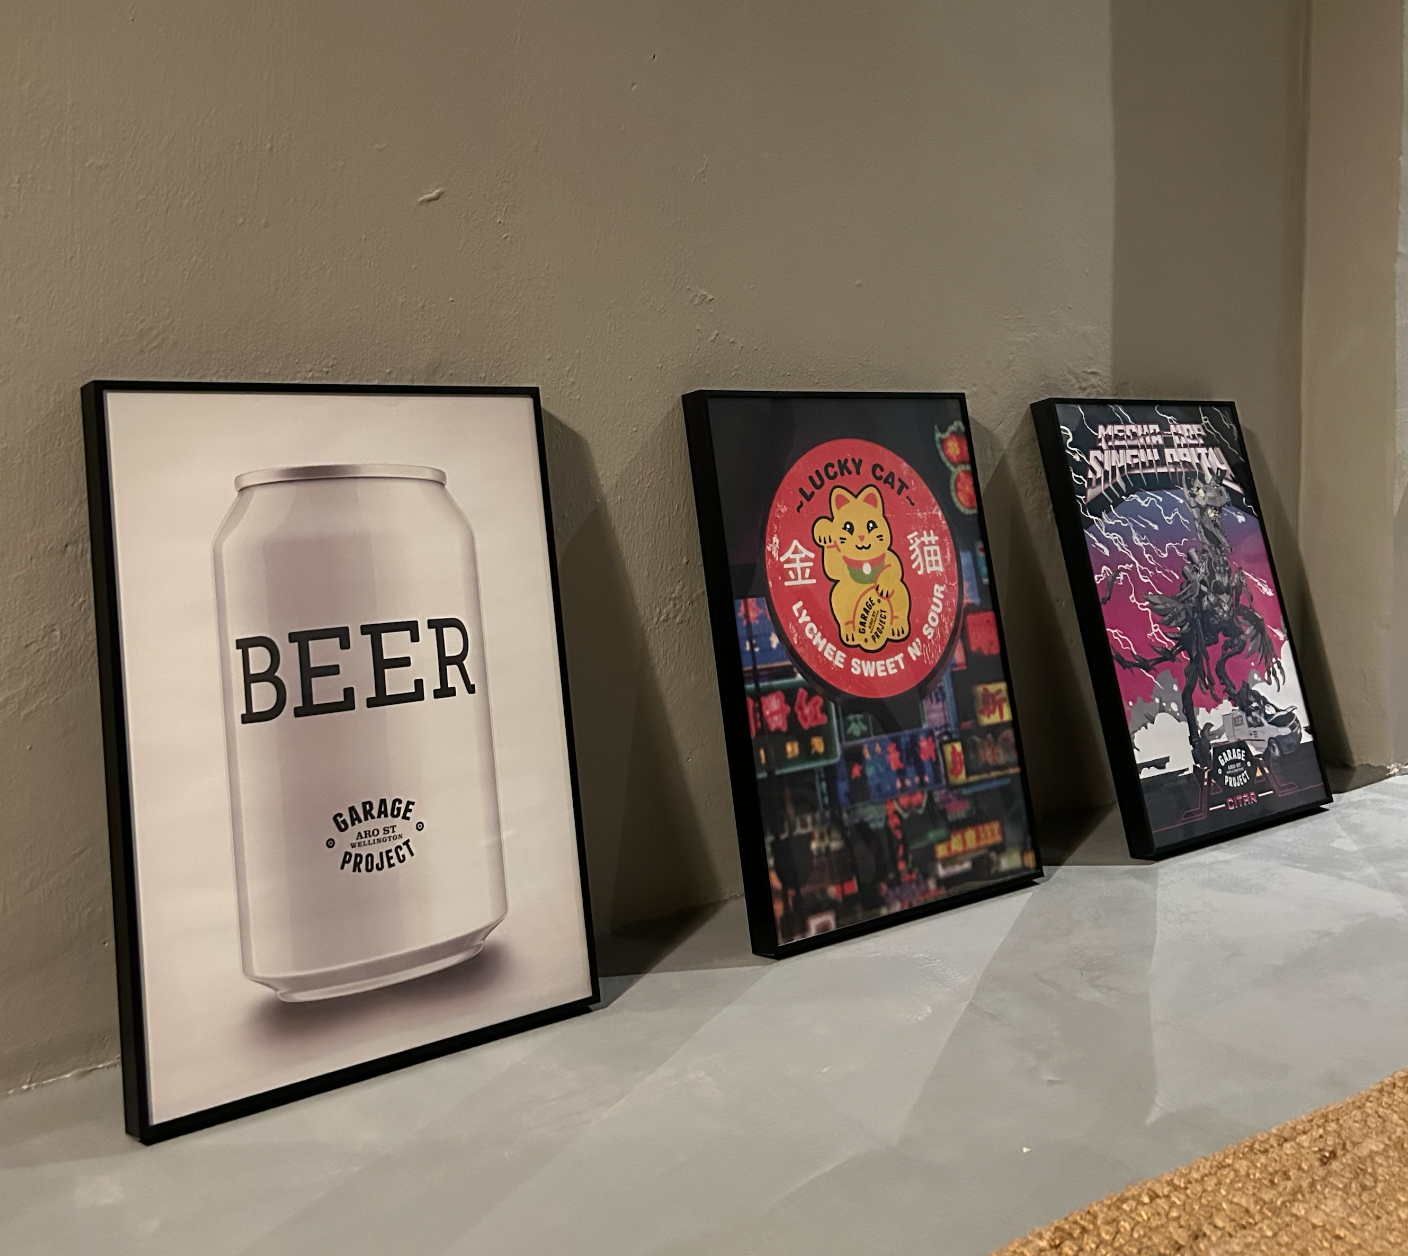 Garage Project BEER Poster with Wall Mountable Metal Frame